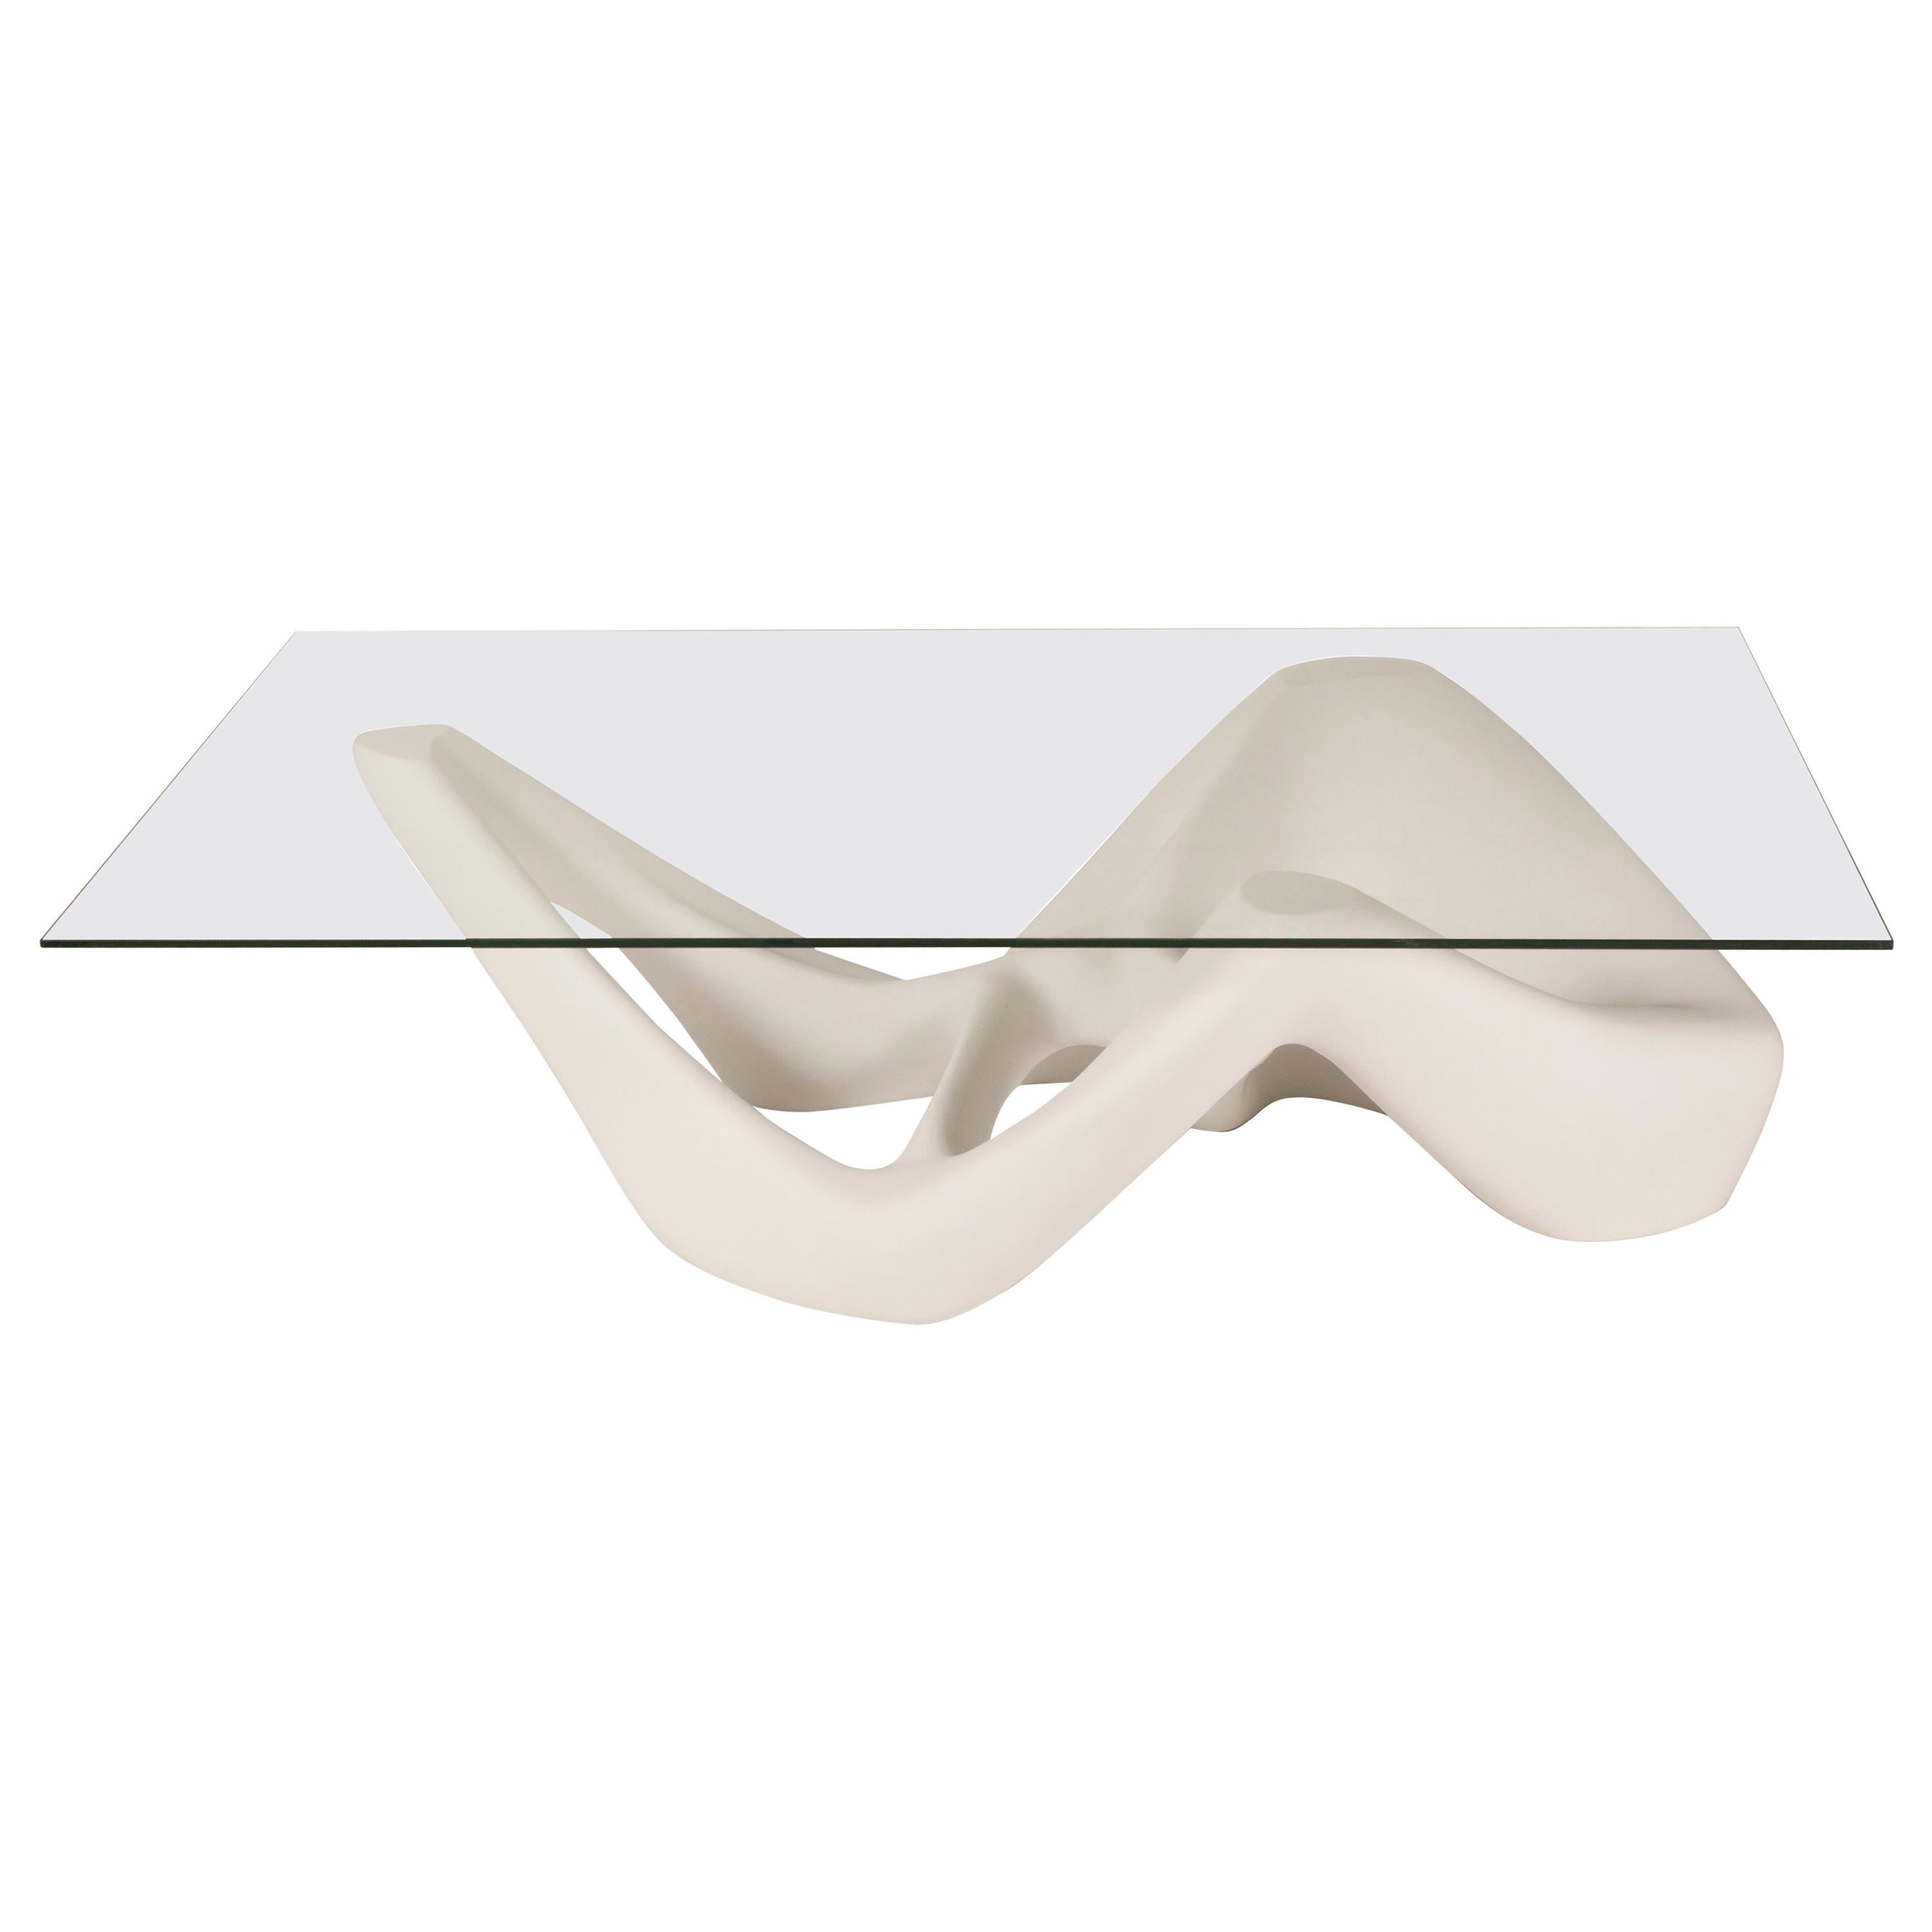 Amorph Net Coffee Table in White Lacquered with Glass table top For Sale